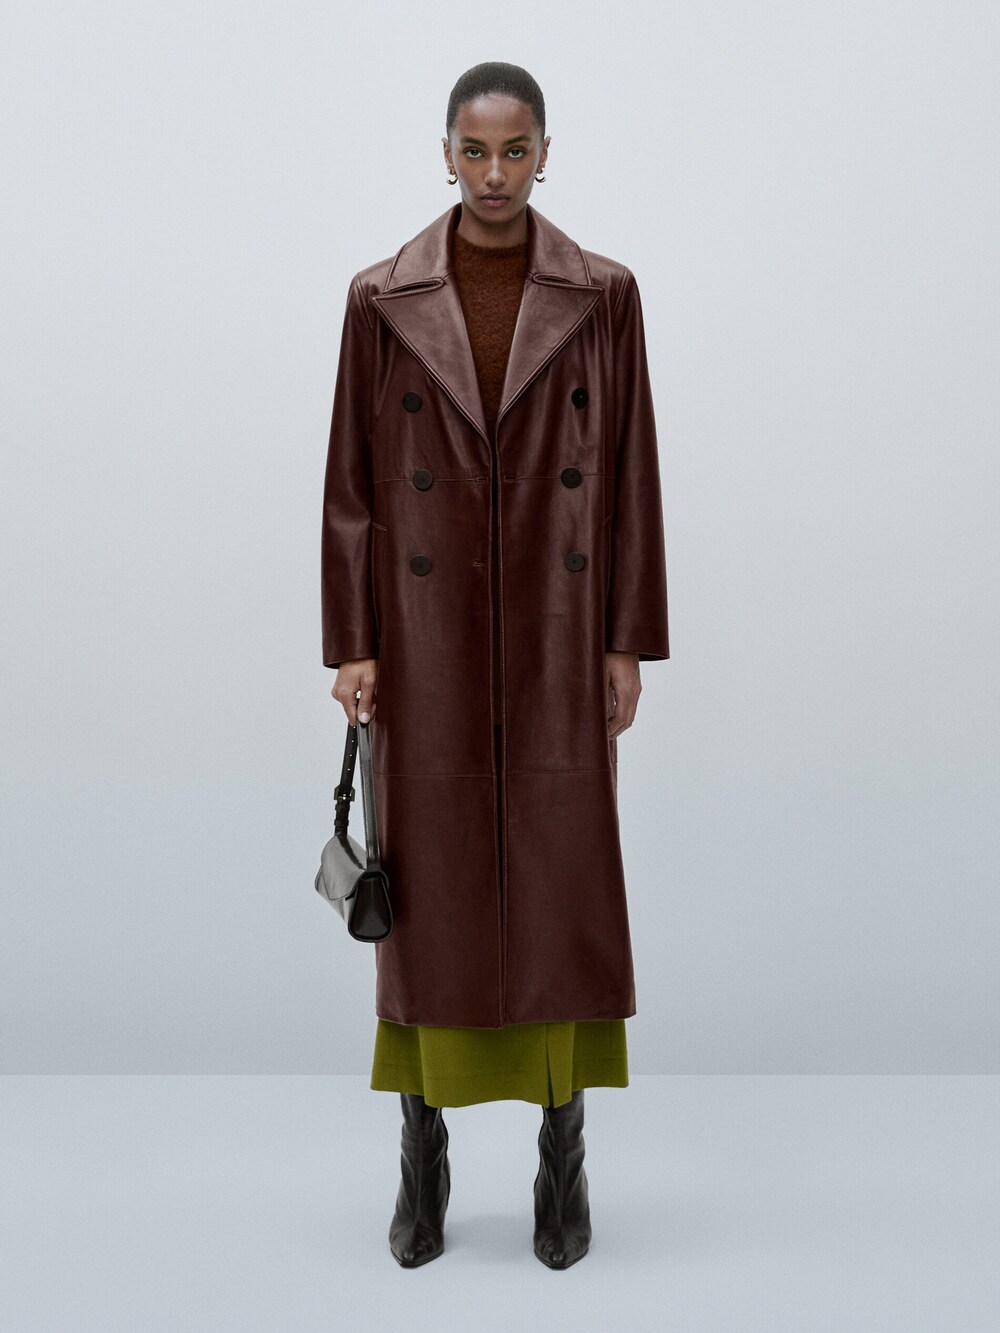 Massimo Dutti nappa leather trench in burgundy. Made from sheepskin leather. The long leather coat has a Double-breasted button fastening at the front with contrasting black buttons. Two side slit pockets. 